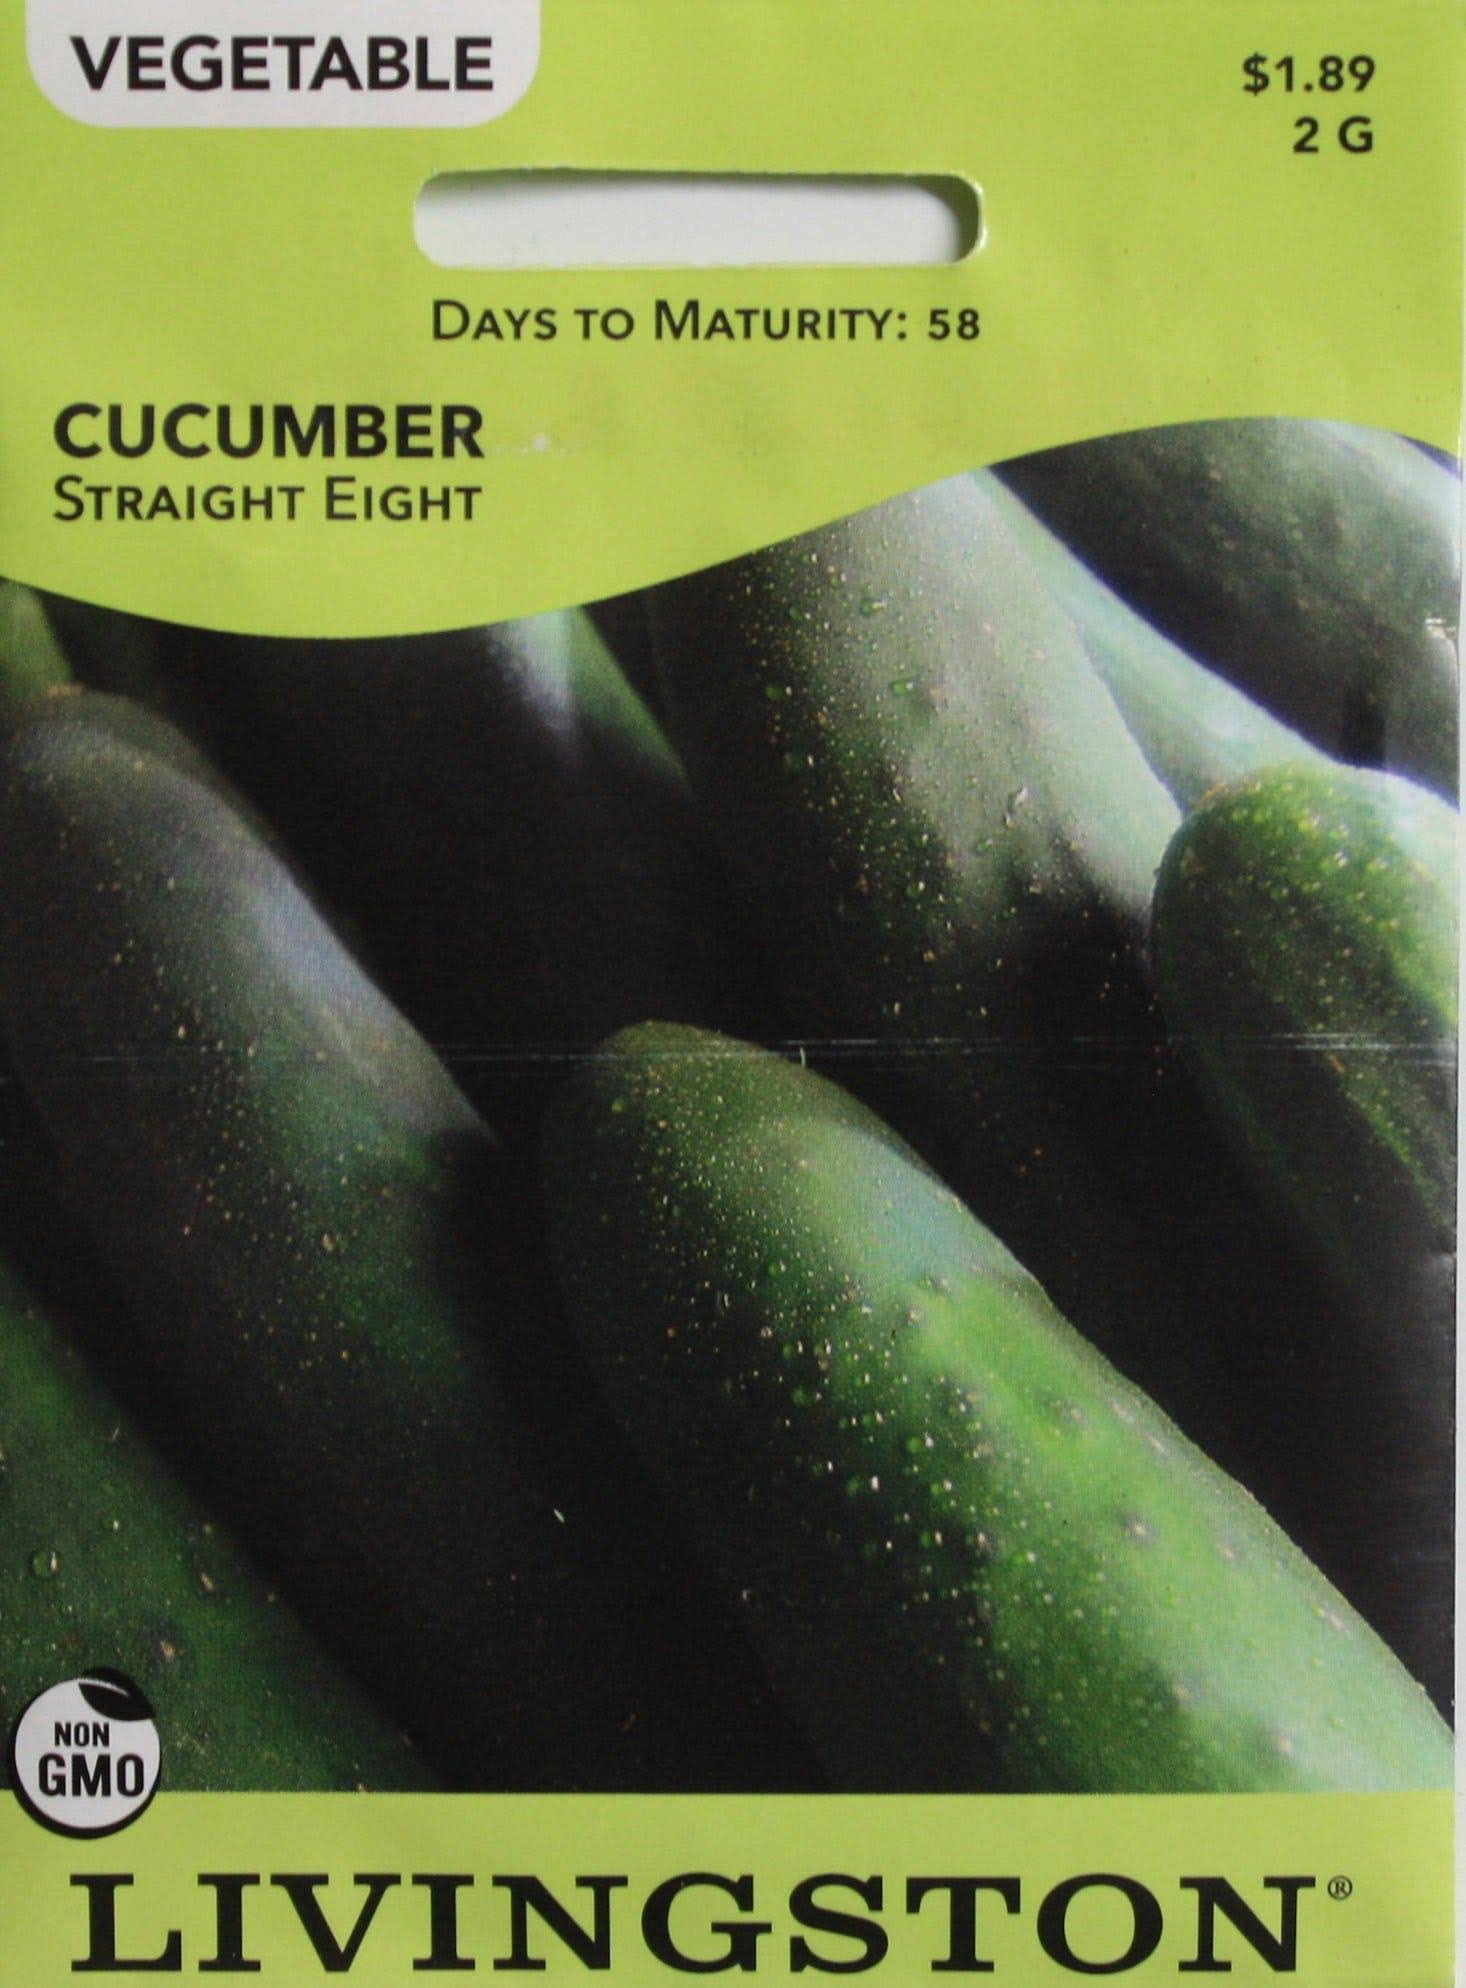 Livingston Seed Cucumber Straight Eight Seeds Packet